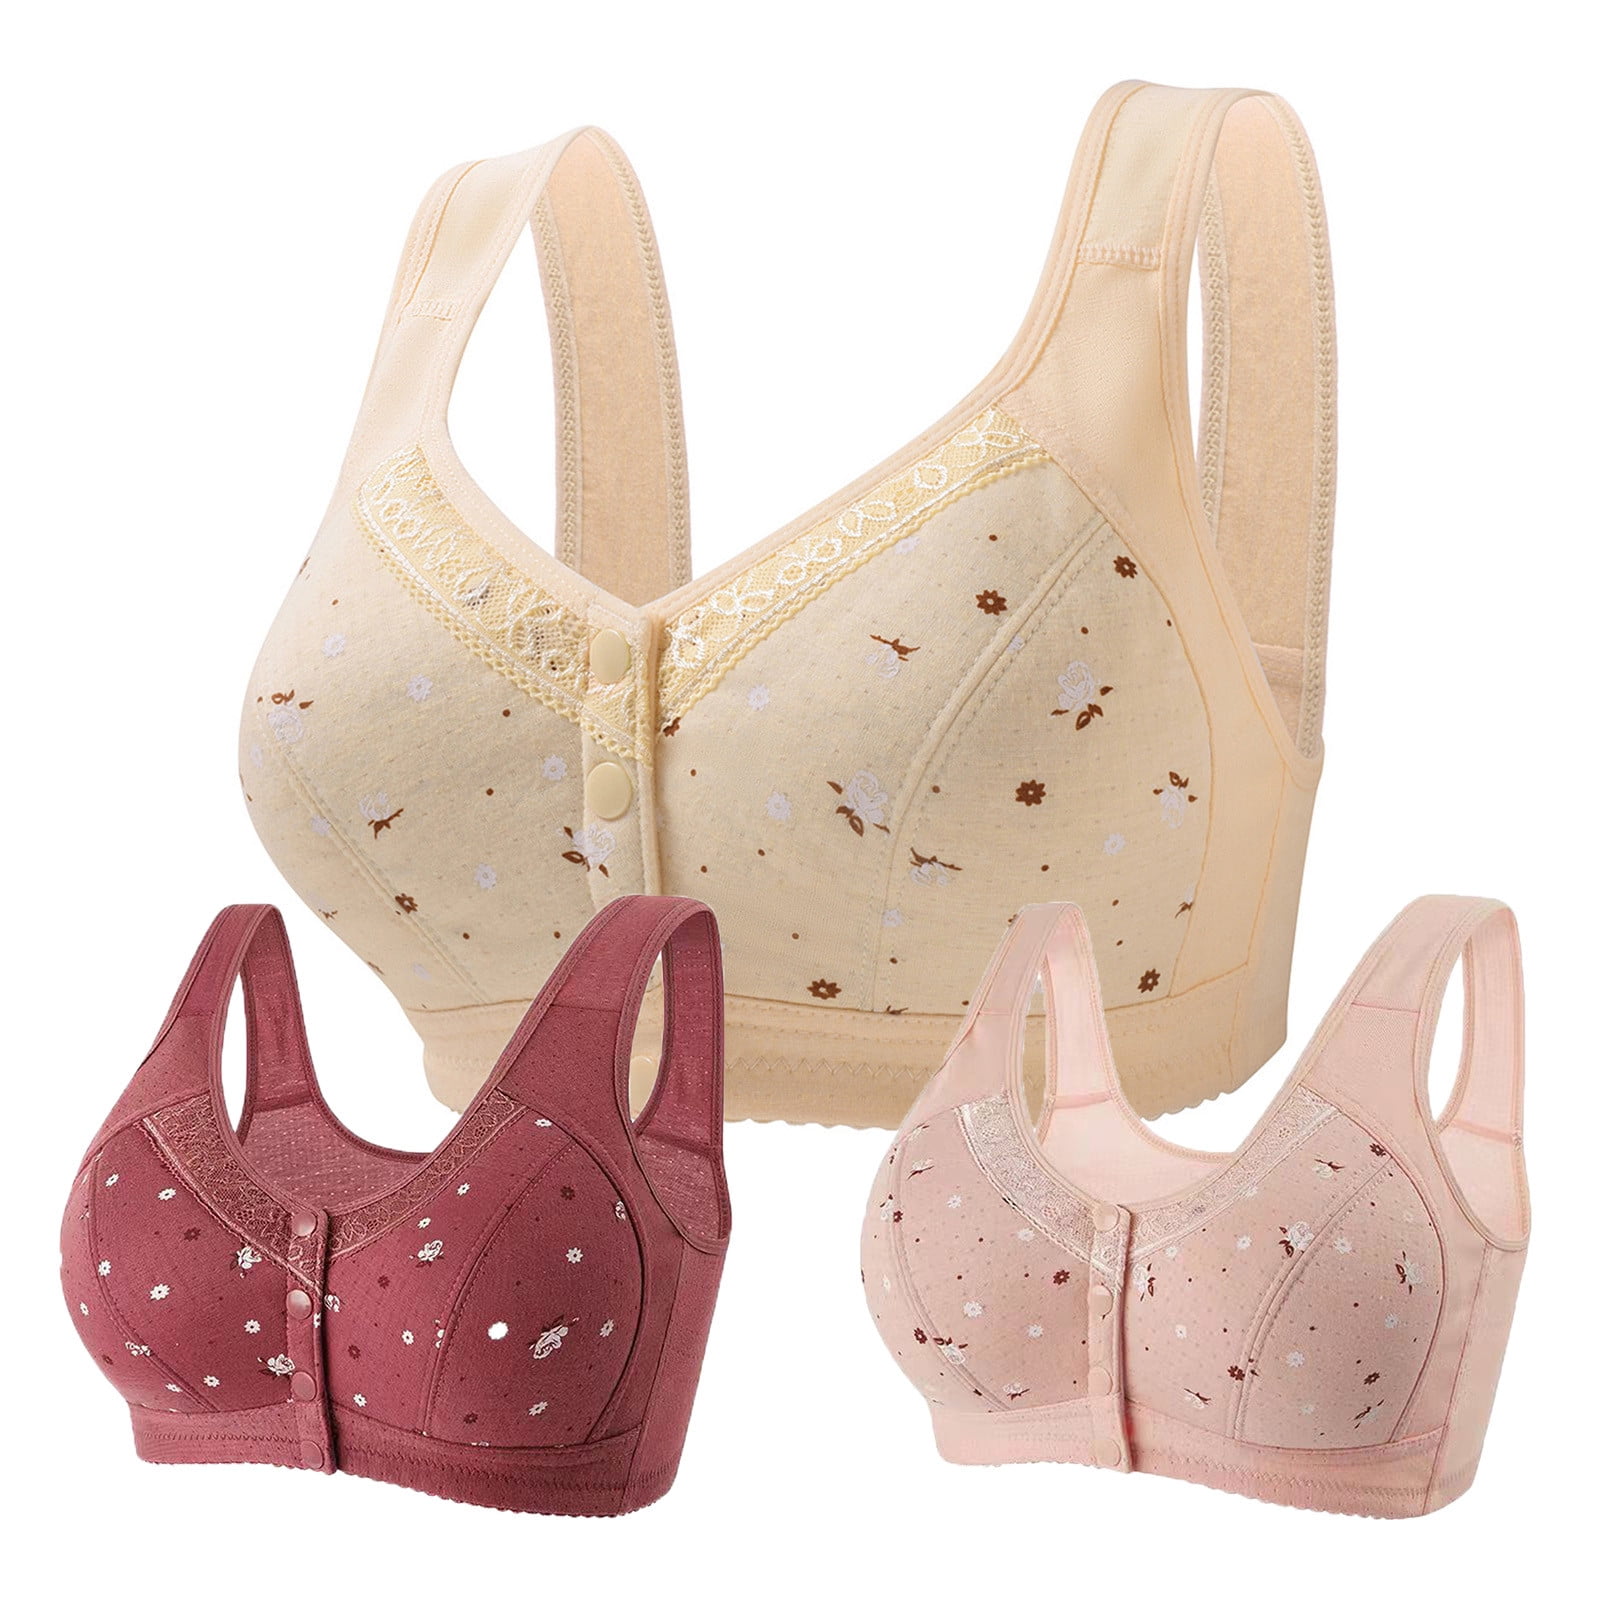 LIBRCLO Daisy Bra for Seniors, Lisa Charm Front Closure Bras, Front ...